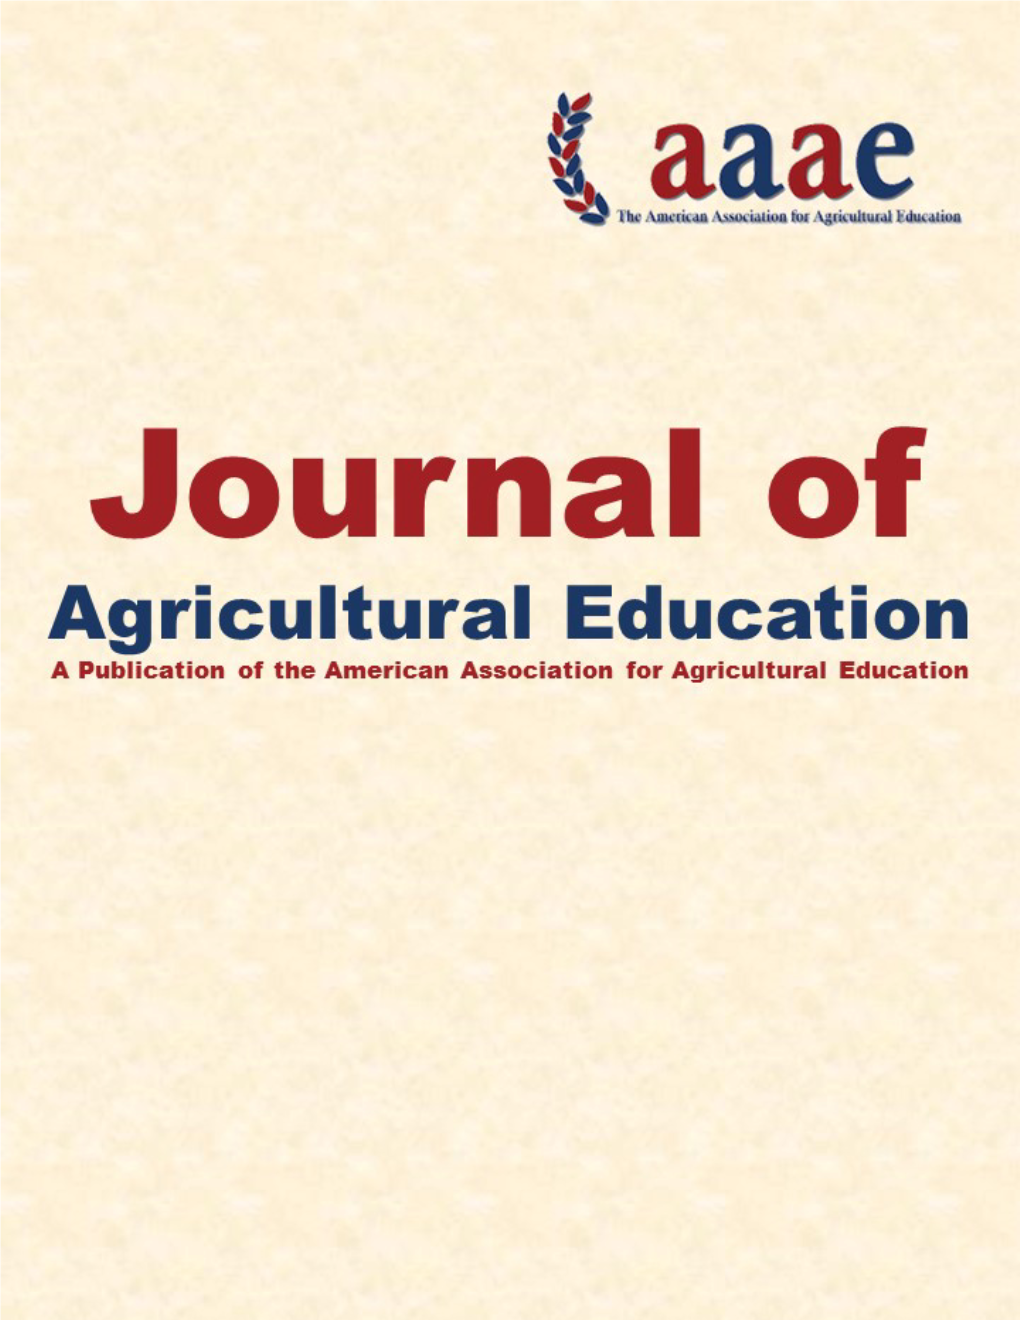 Journal of Agricultural Education 1 Volume 59, Issue 4, 2018